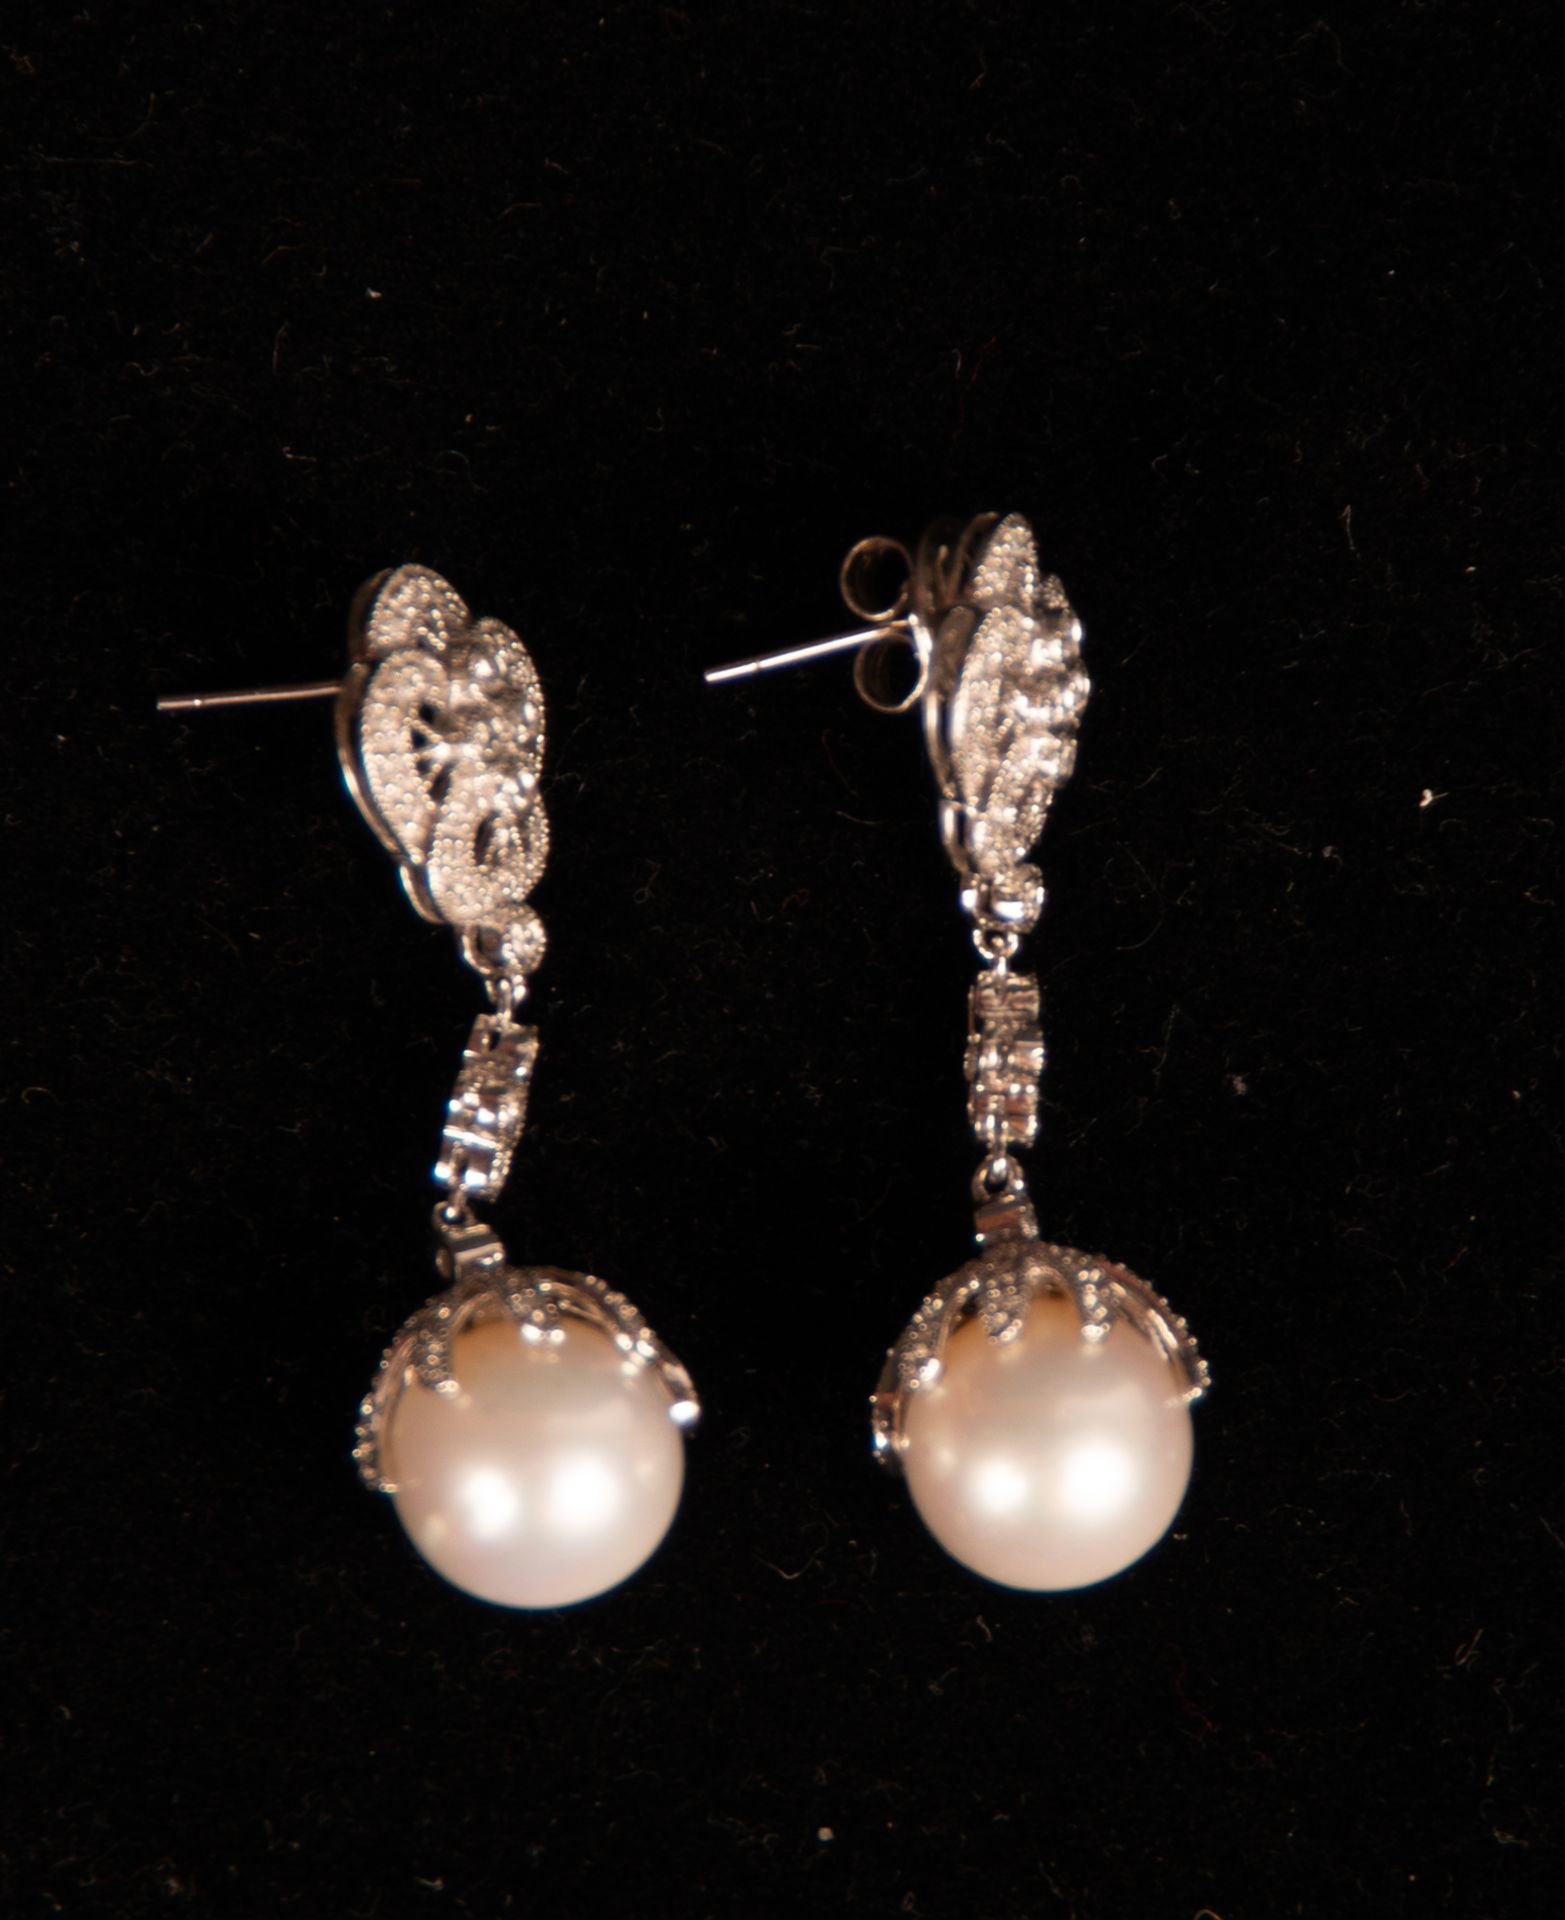 Pair of Clover-shaped Earrings with Crimped Pearls - Image 3 of 5